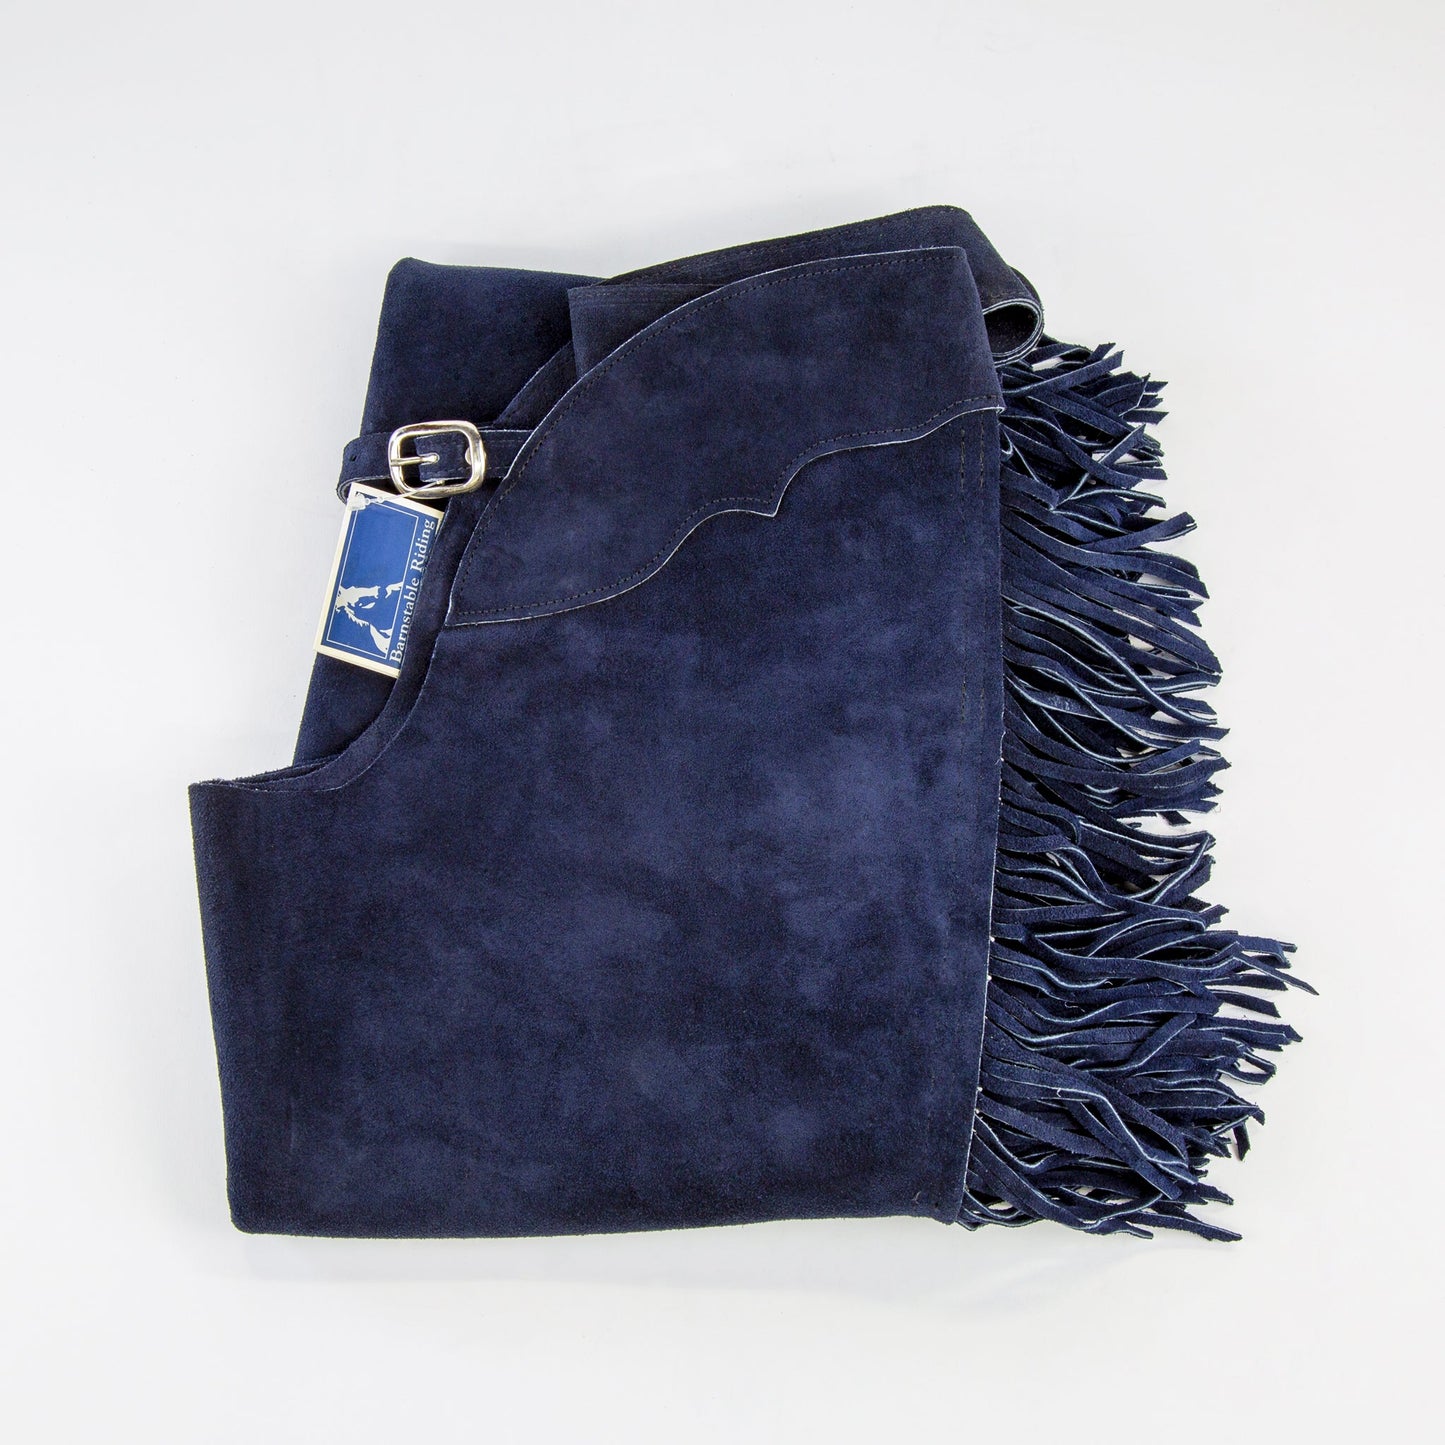 Western Boot Cut Chaps - Navy Suede - Fringe